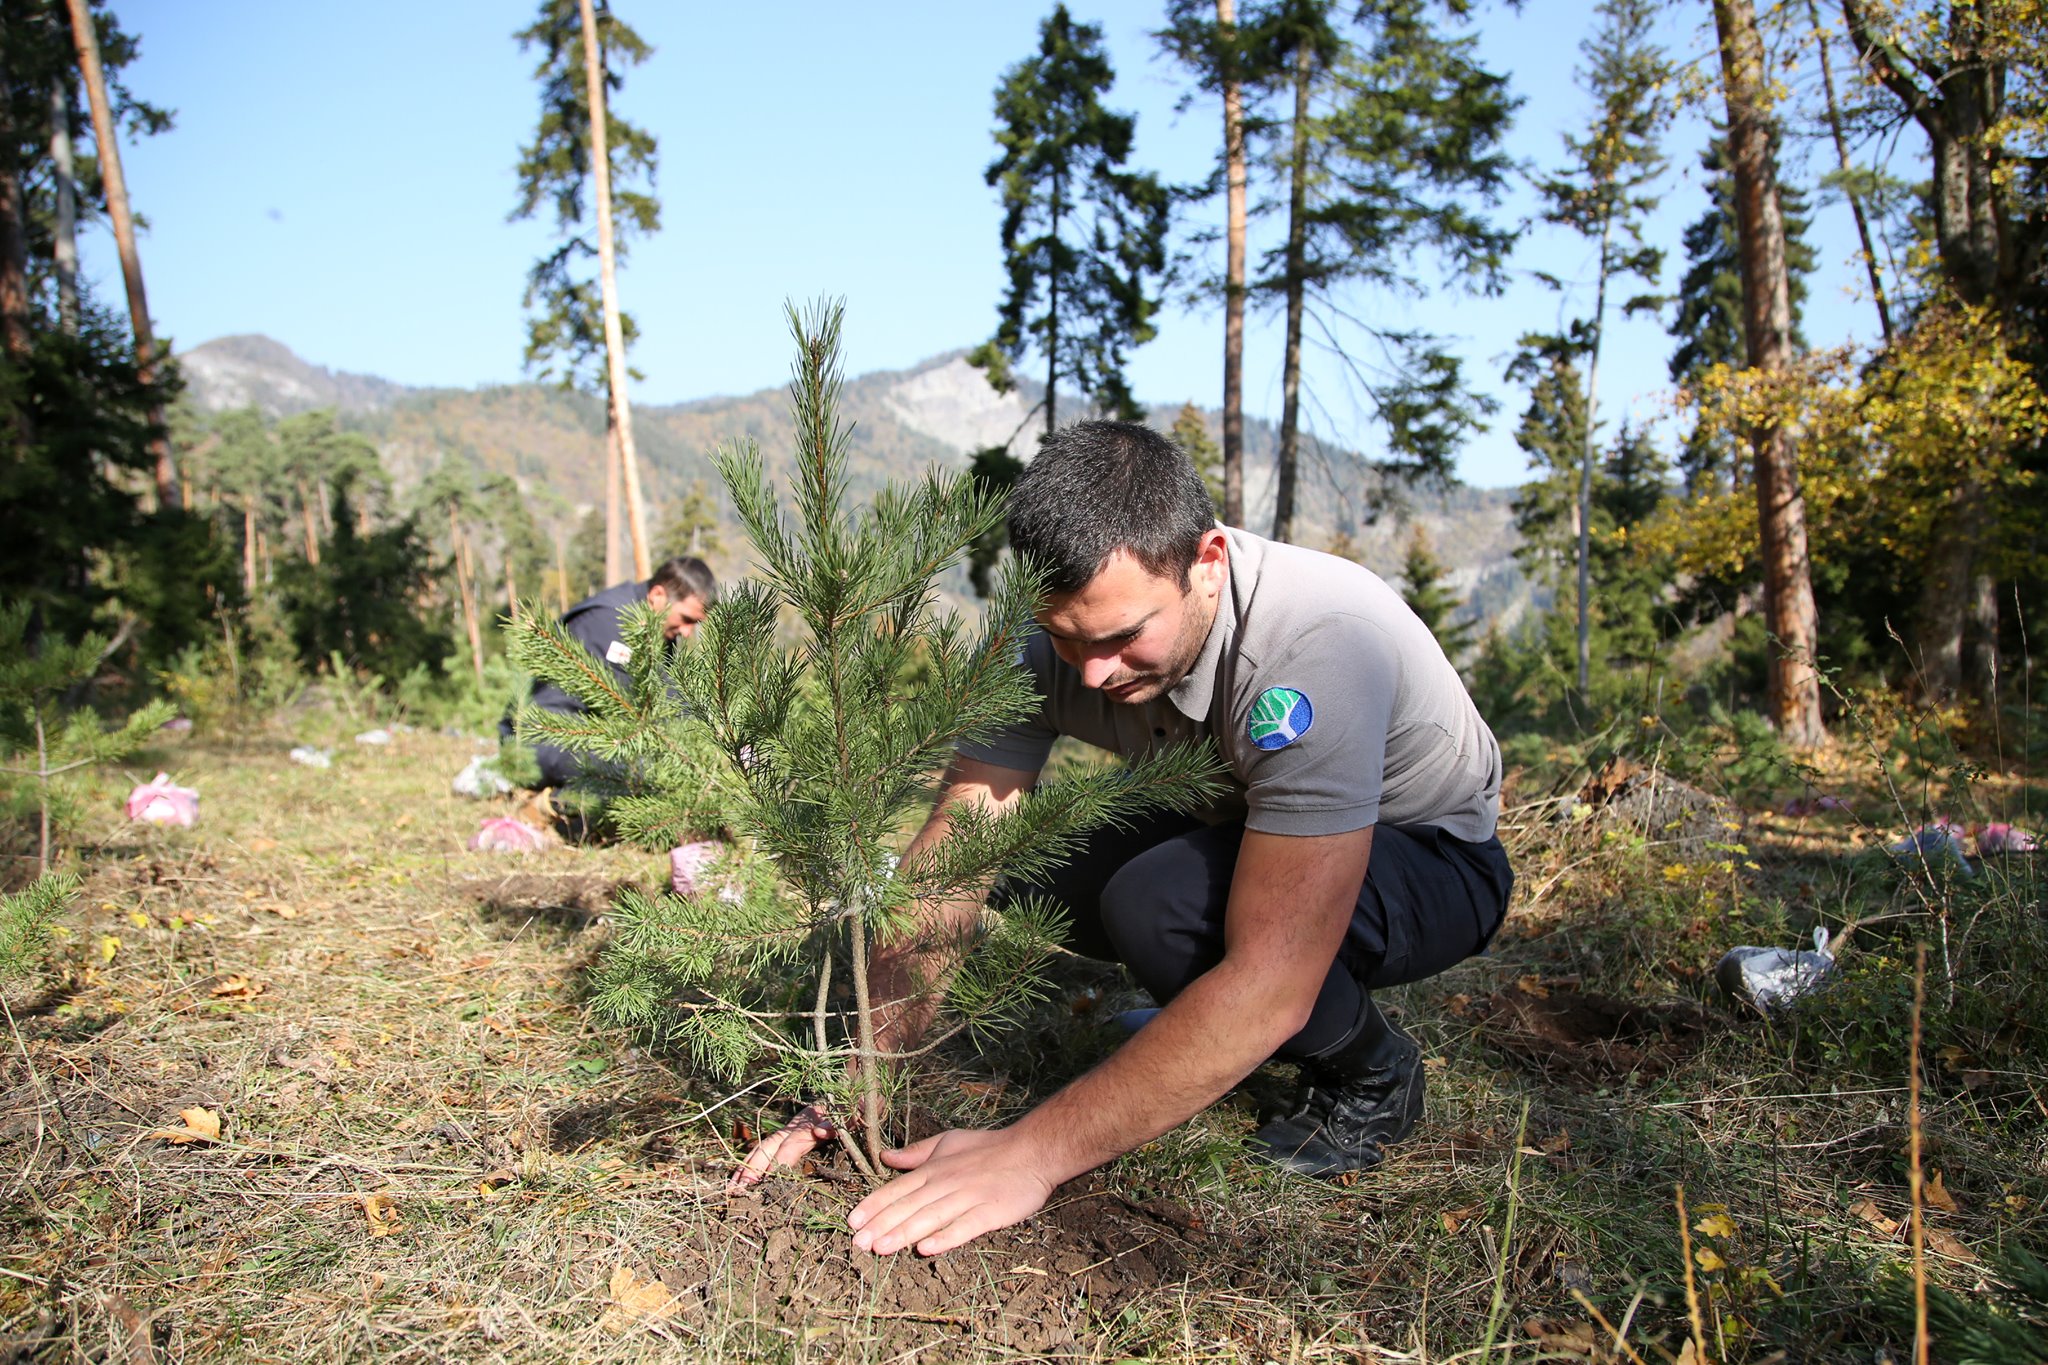 The forest restoration project in Borjomi is ongoing